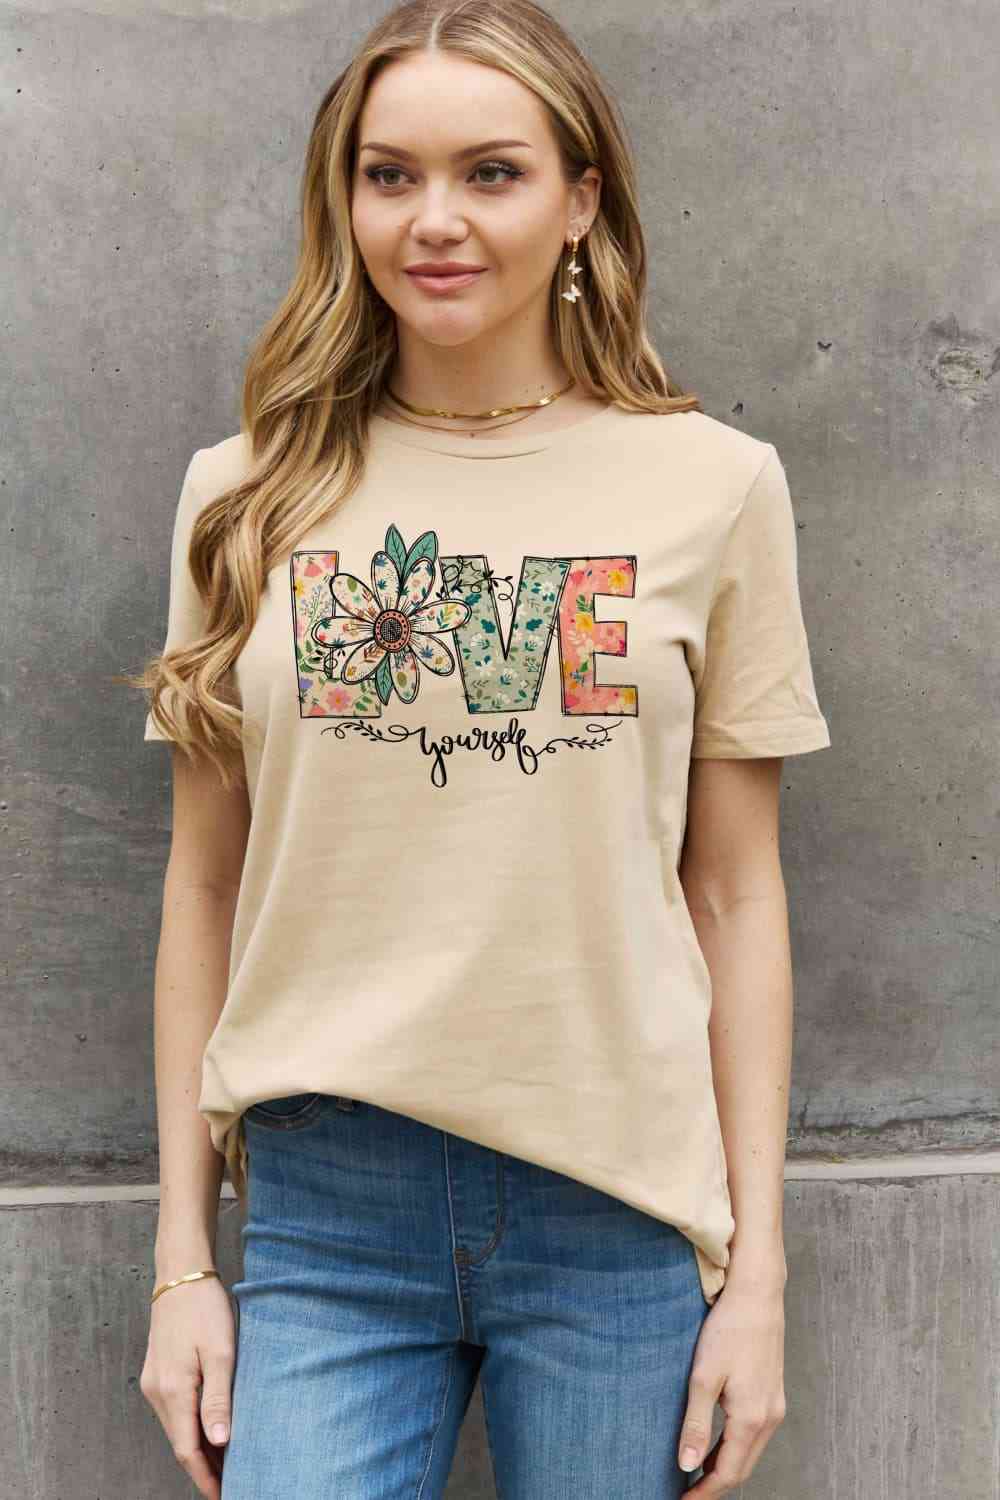 LOVE YOURSELF Graphic Cotton Tee - T-Shirts - Shirts & Tops - 8 - 2024